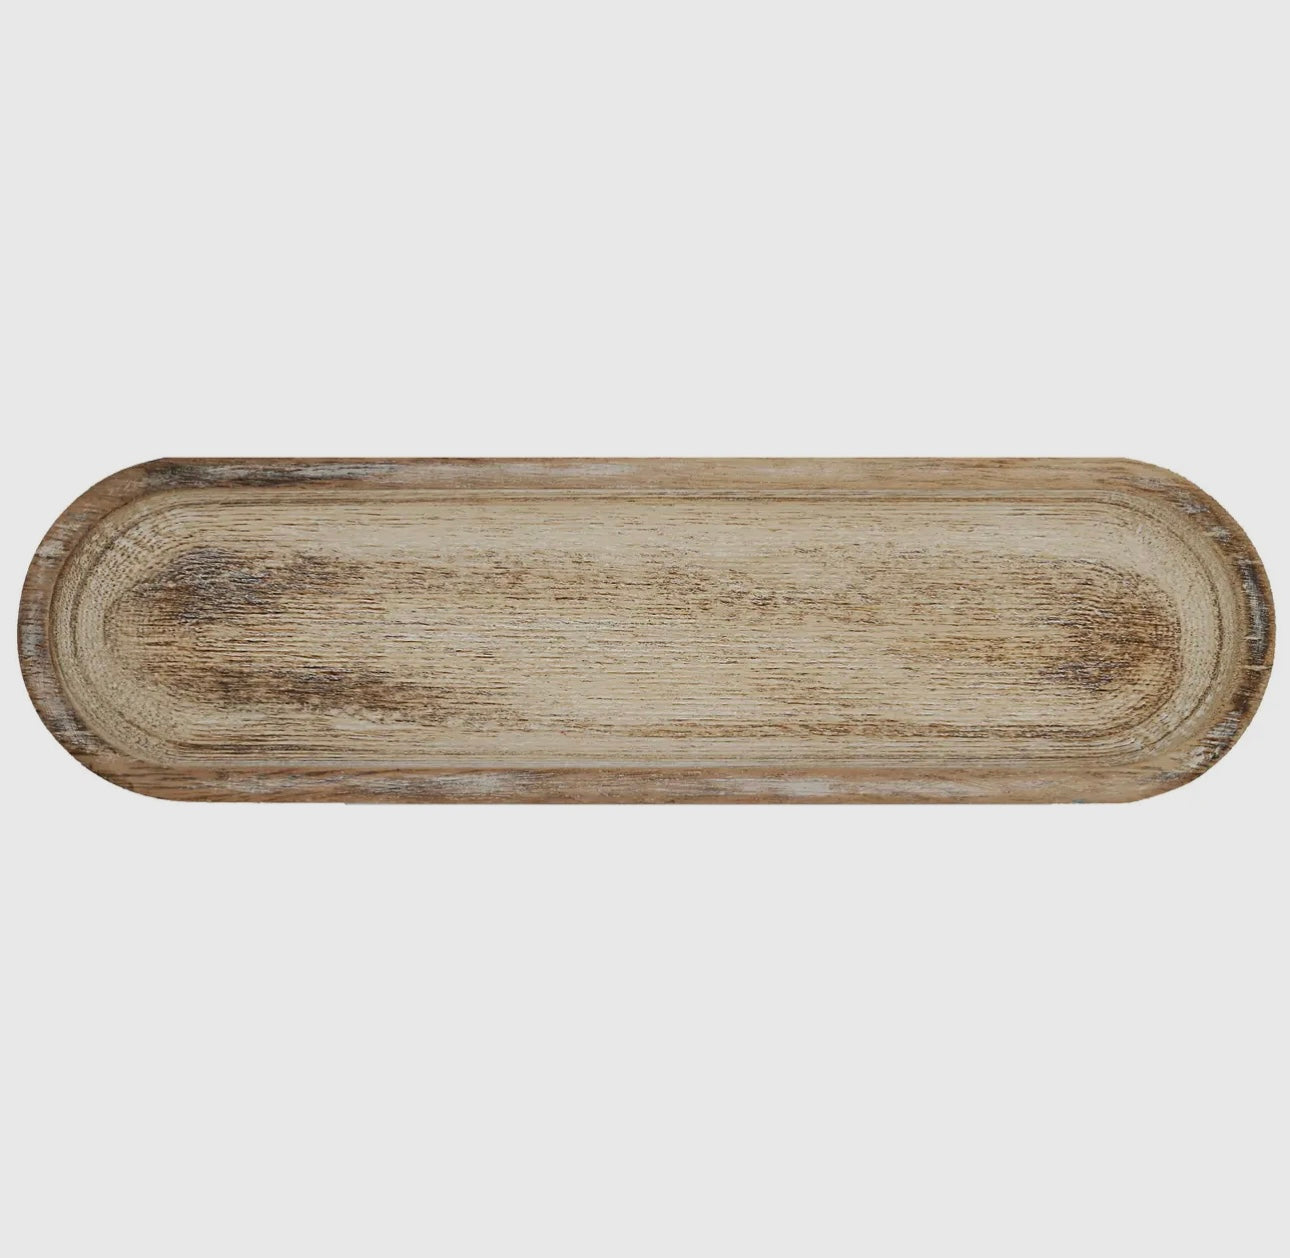 Rustic Oval Wood Tray